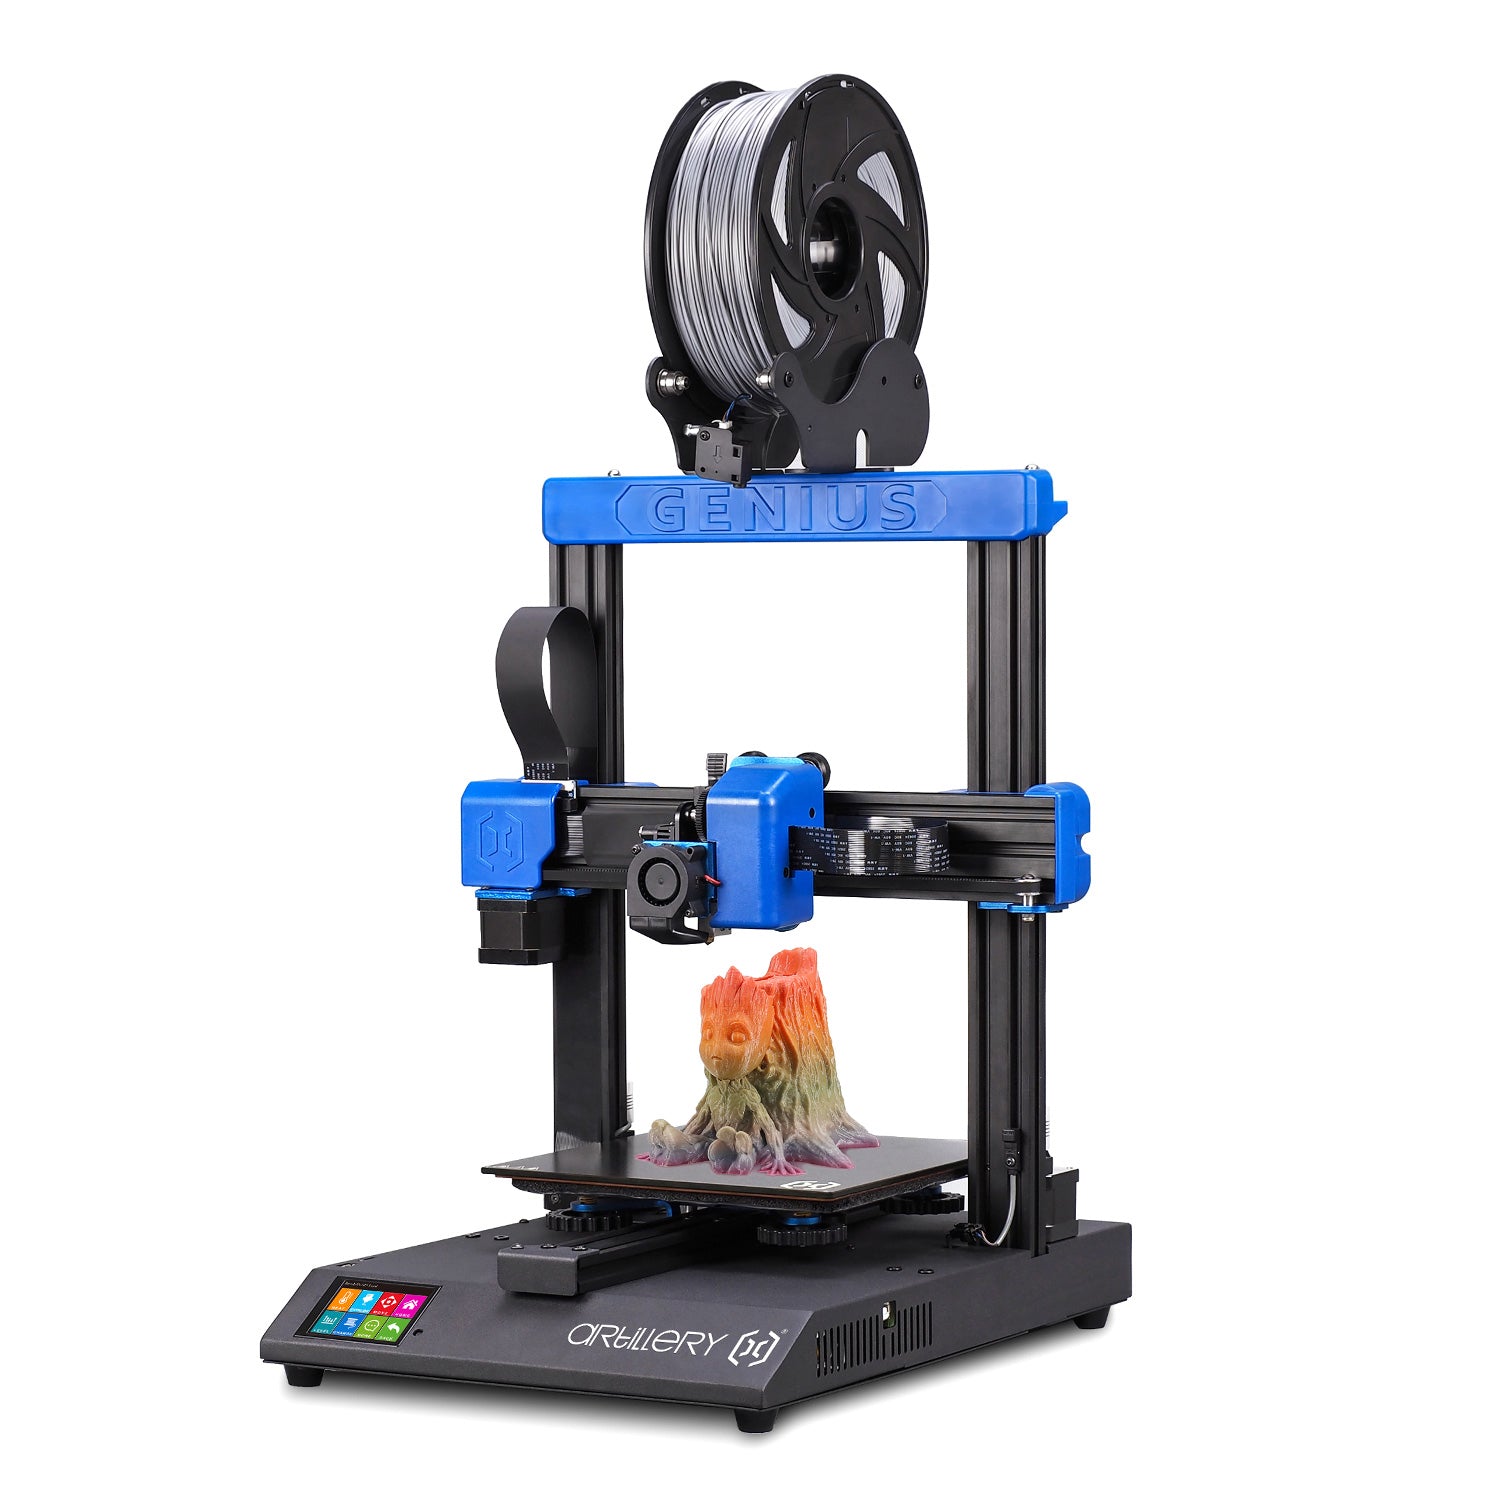 Royal Blue Artillery® Genius DIY 3D Printer Kit 220*220*250mm Print Size with Ultra-Quiet Stepper Motor TFT Touch Screen Support Filament Runout Detection&Power Failure Function